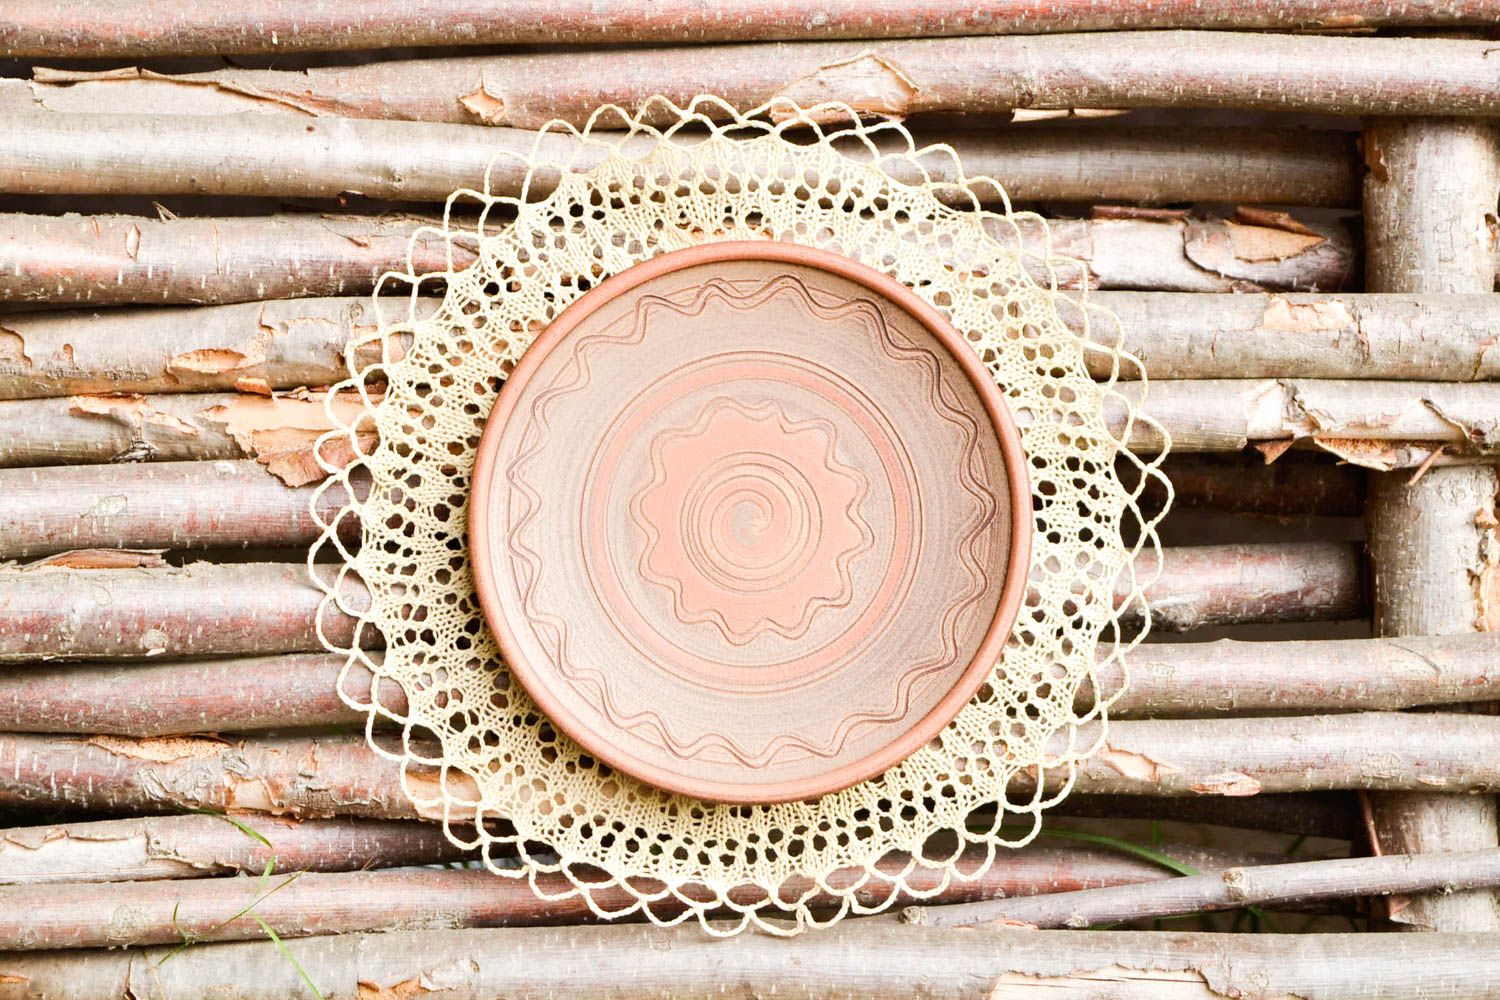 Handmade plate clay plate for kitchen decor ideas unusual gift home decor photo 1